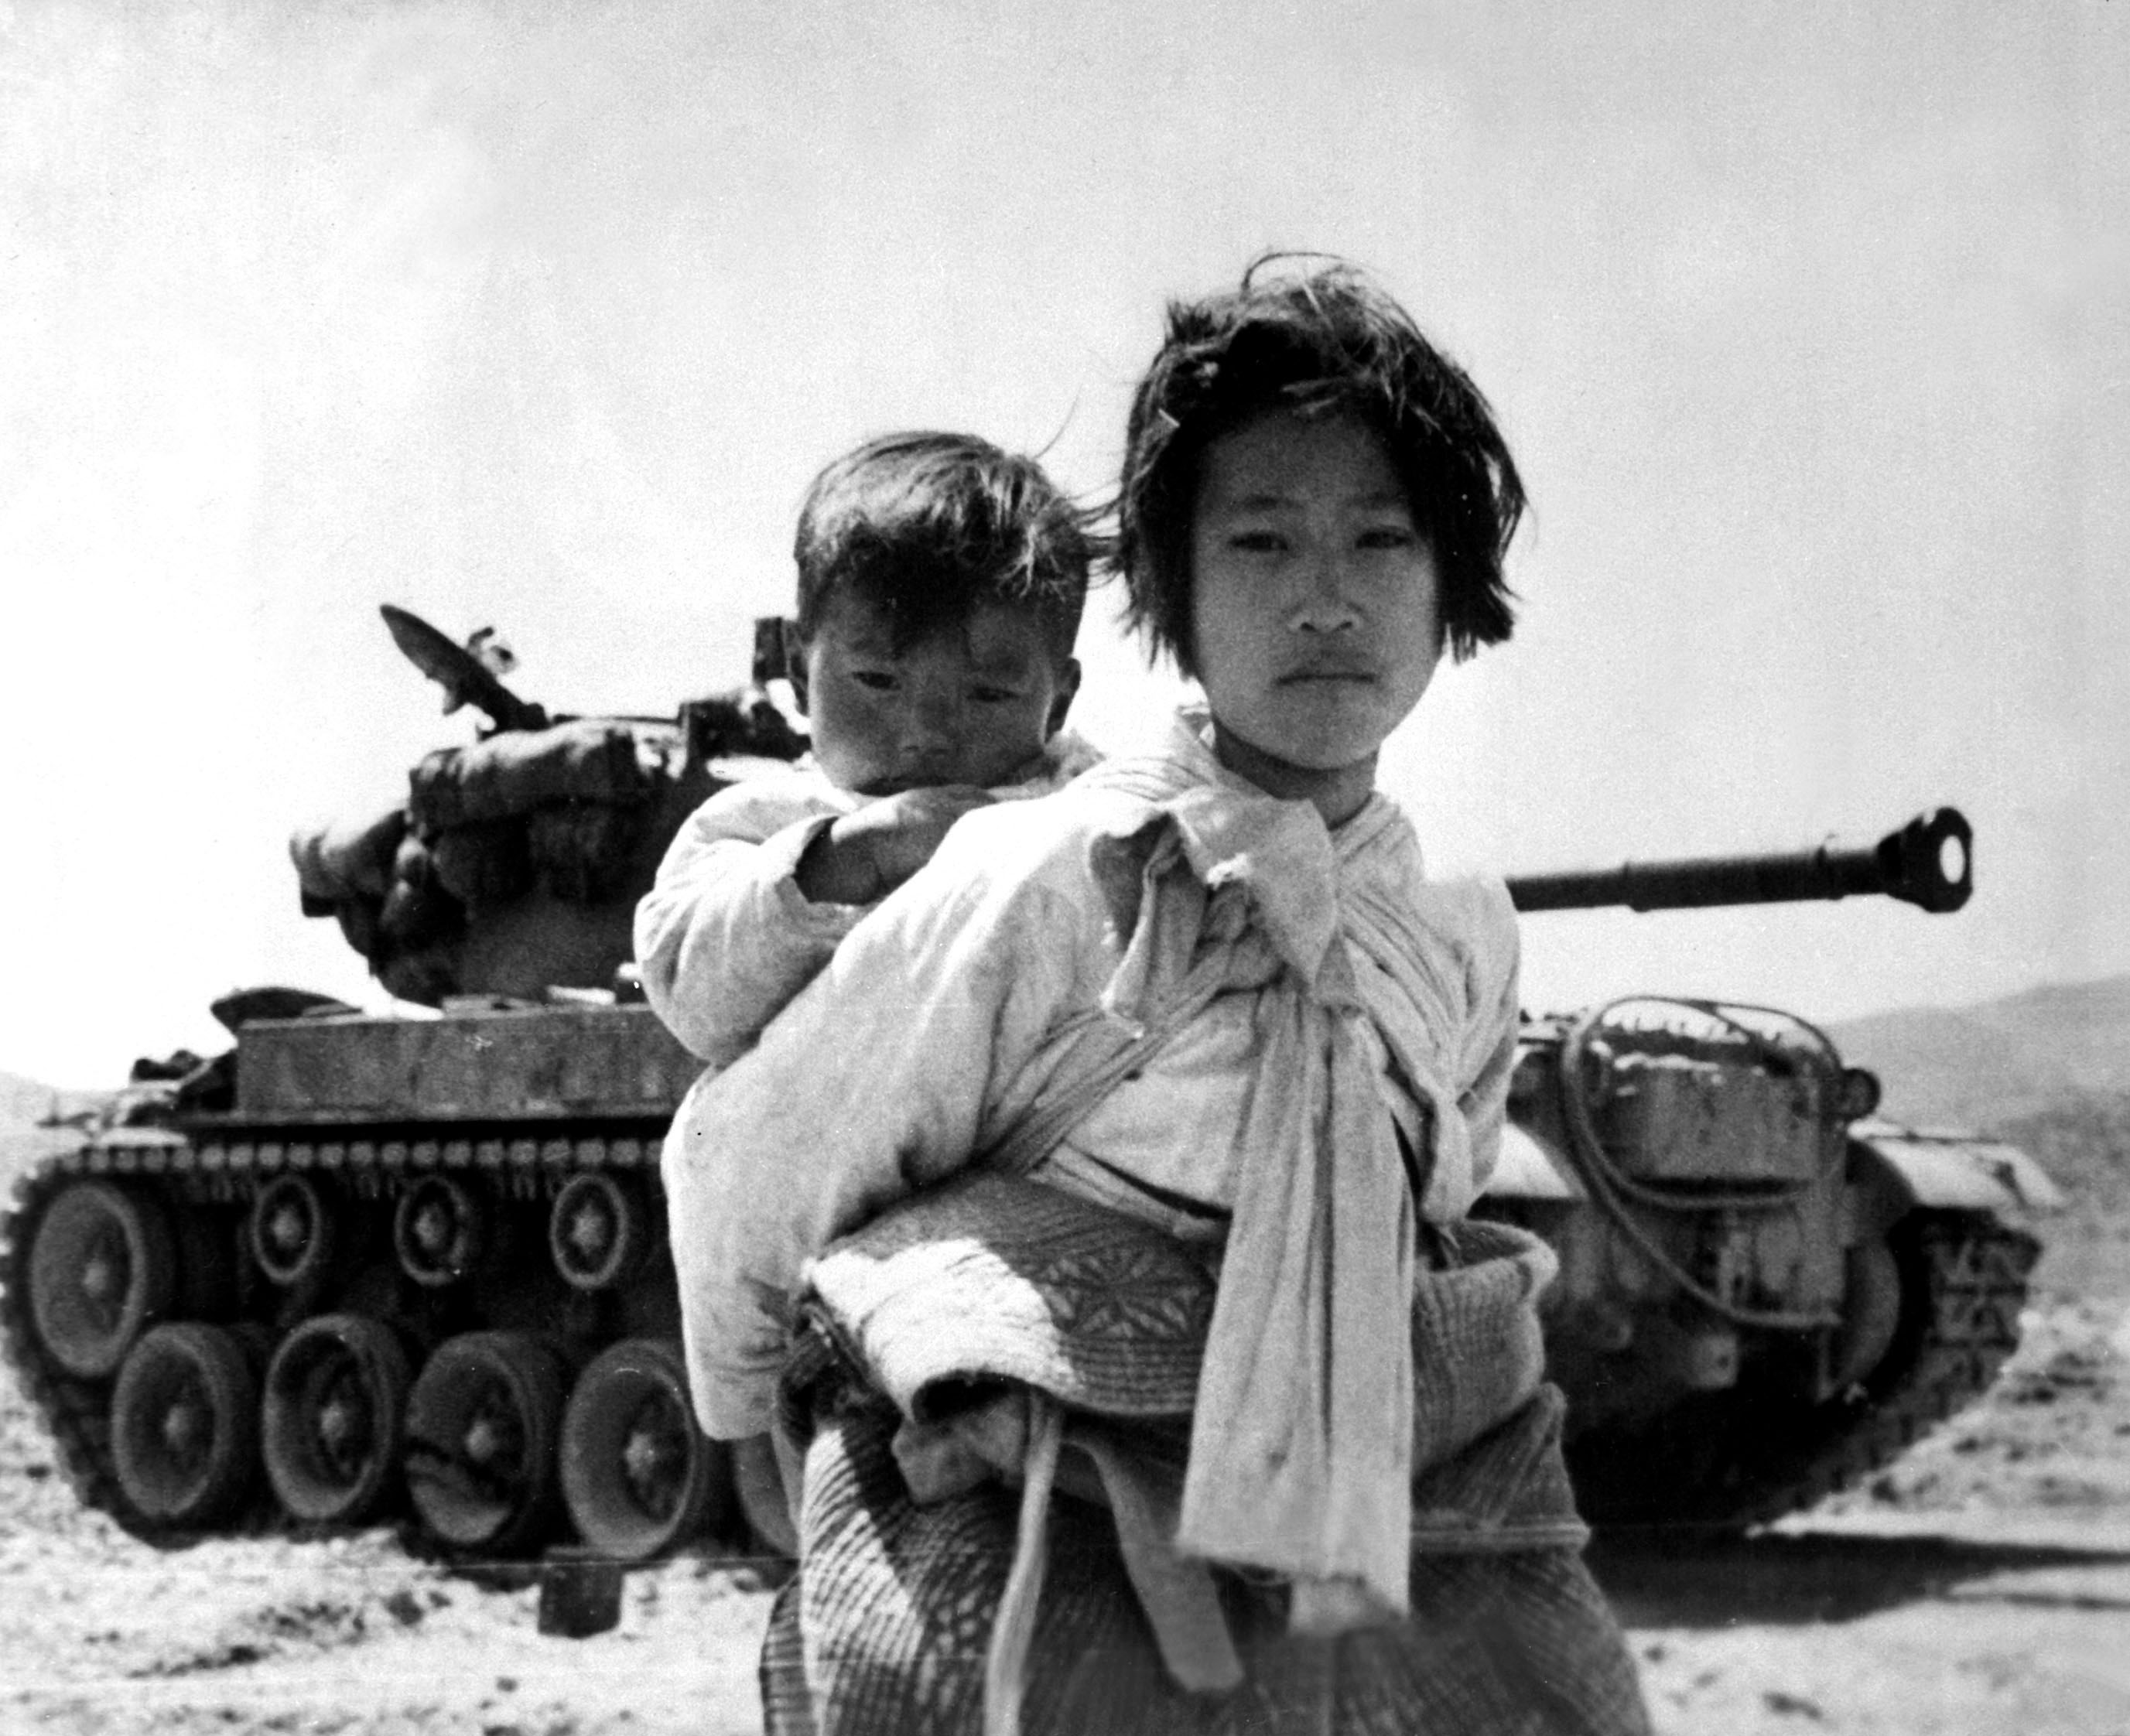 With her brother on her back a war weary Korean girl tiredly trudges by a stalled M-26 tank, at Haengju, Korea, in June 1951.